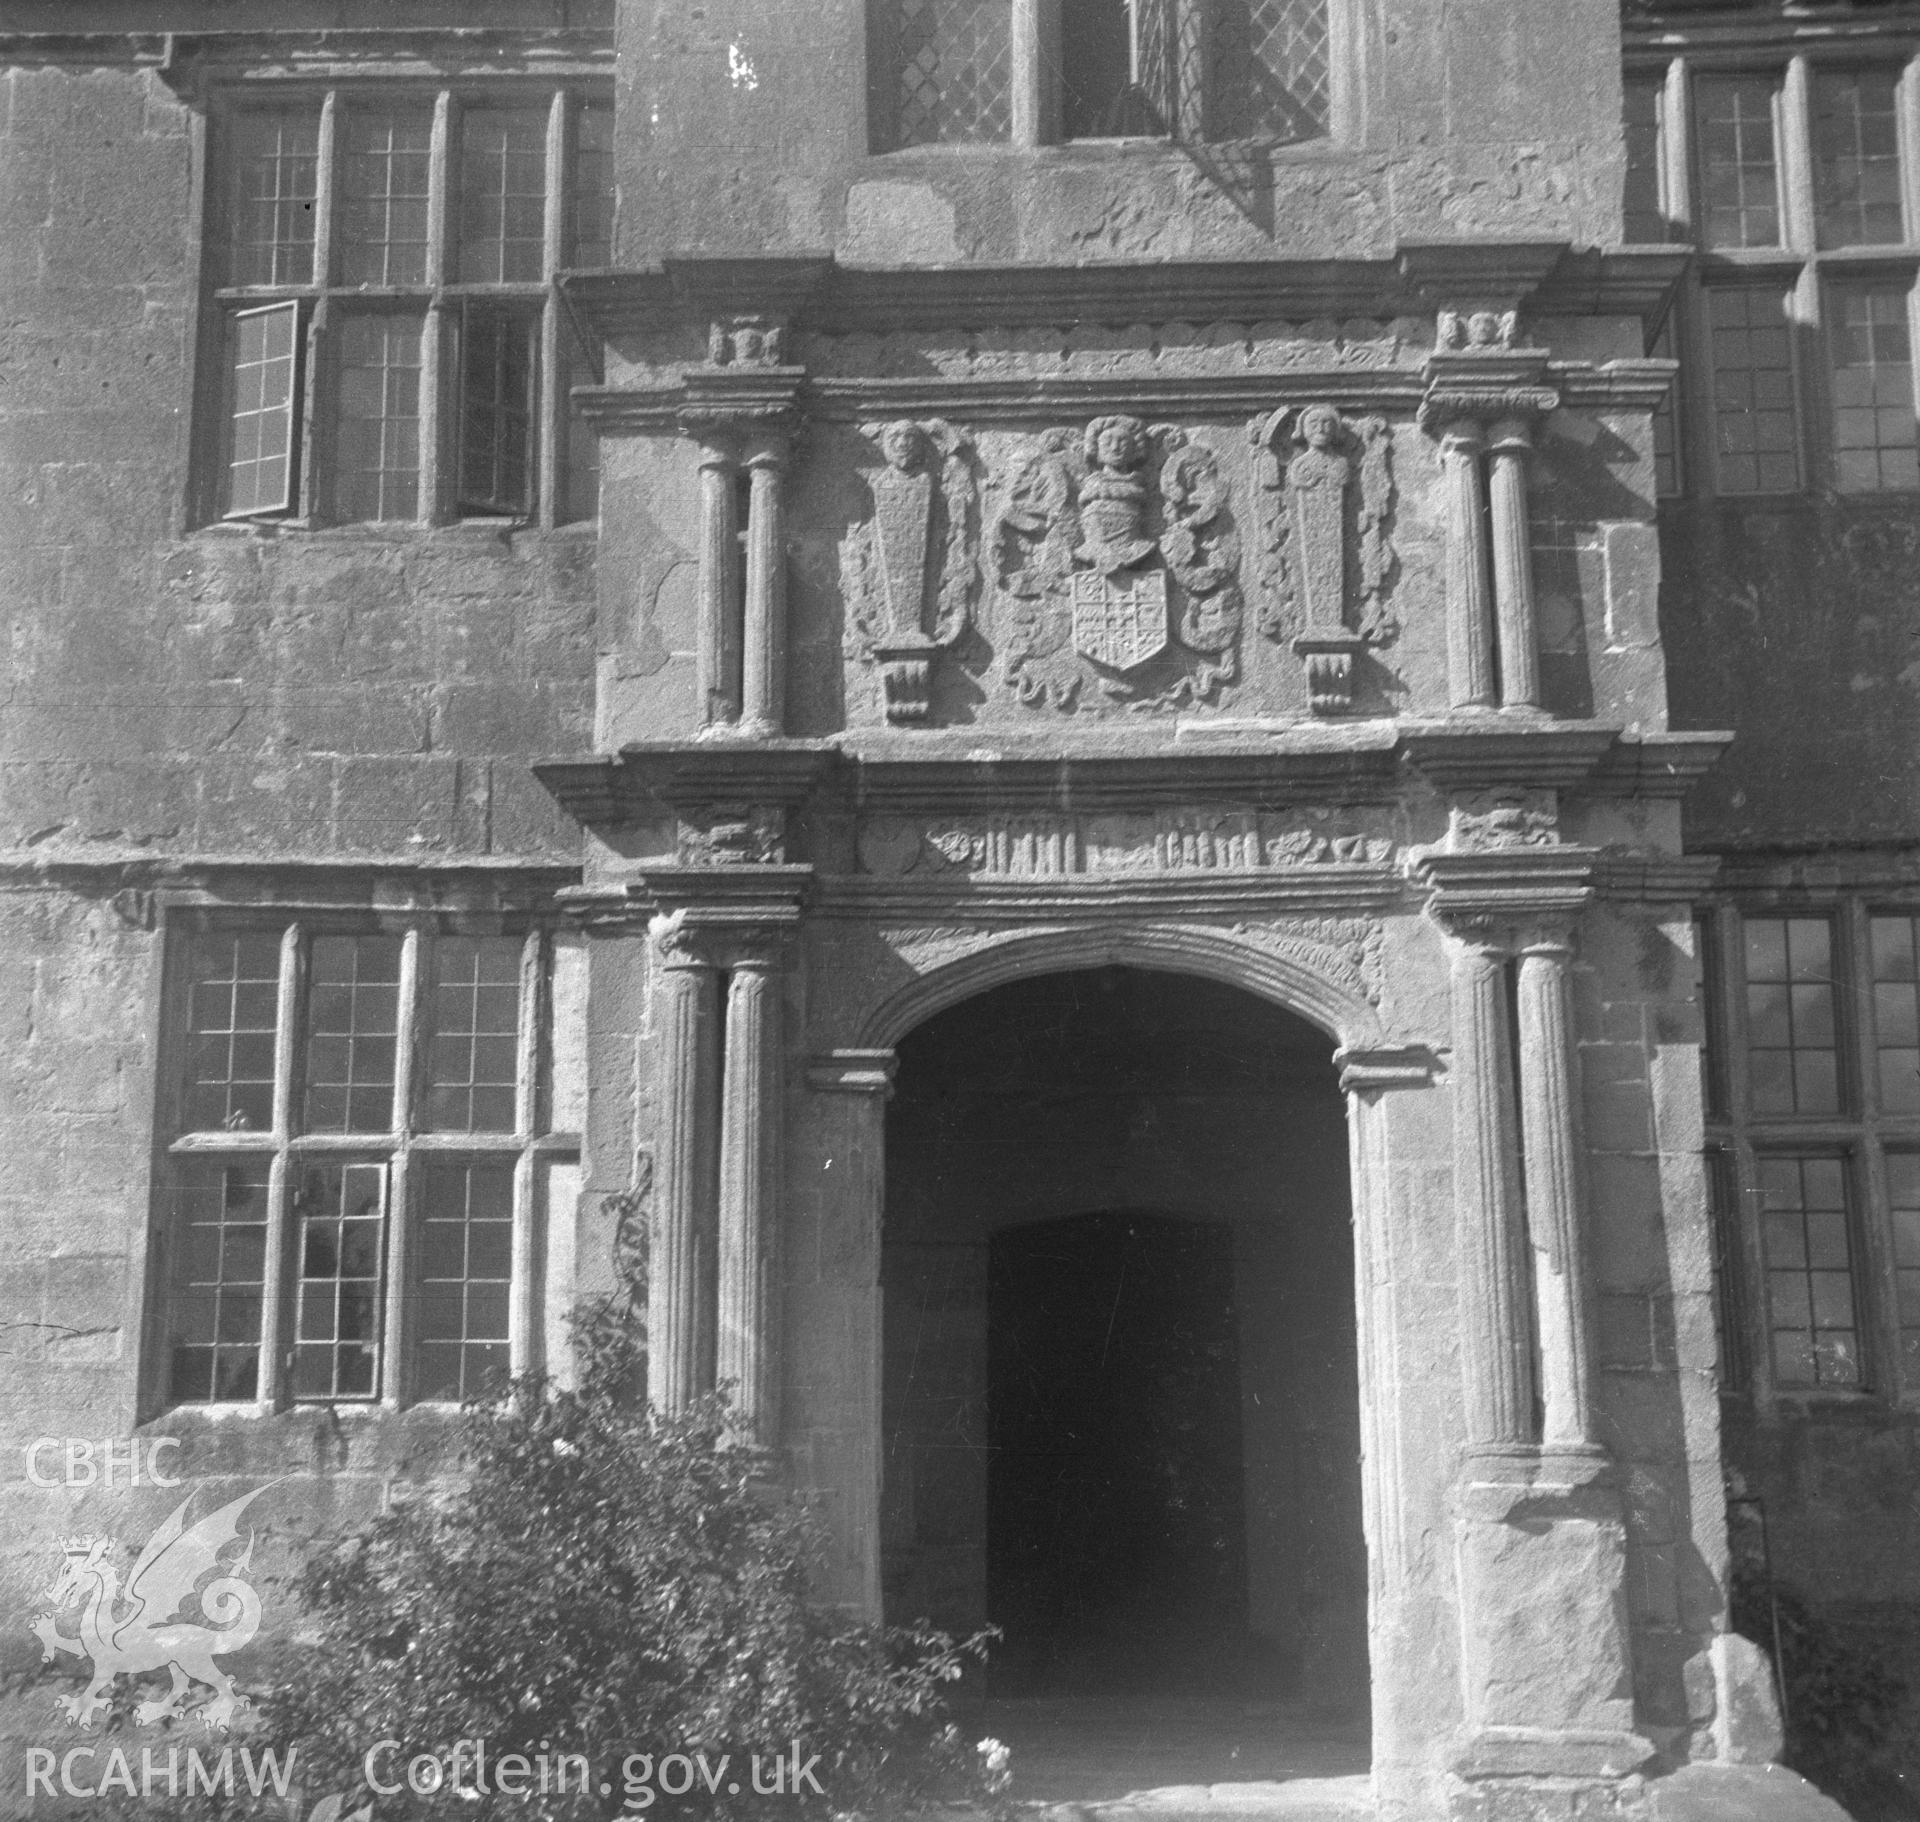 Digital copy of an undated nitrate negative showing exterior view of entrance porch  to Treowen, Monmouthshire.